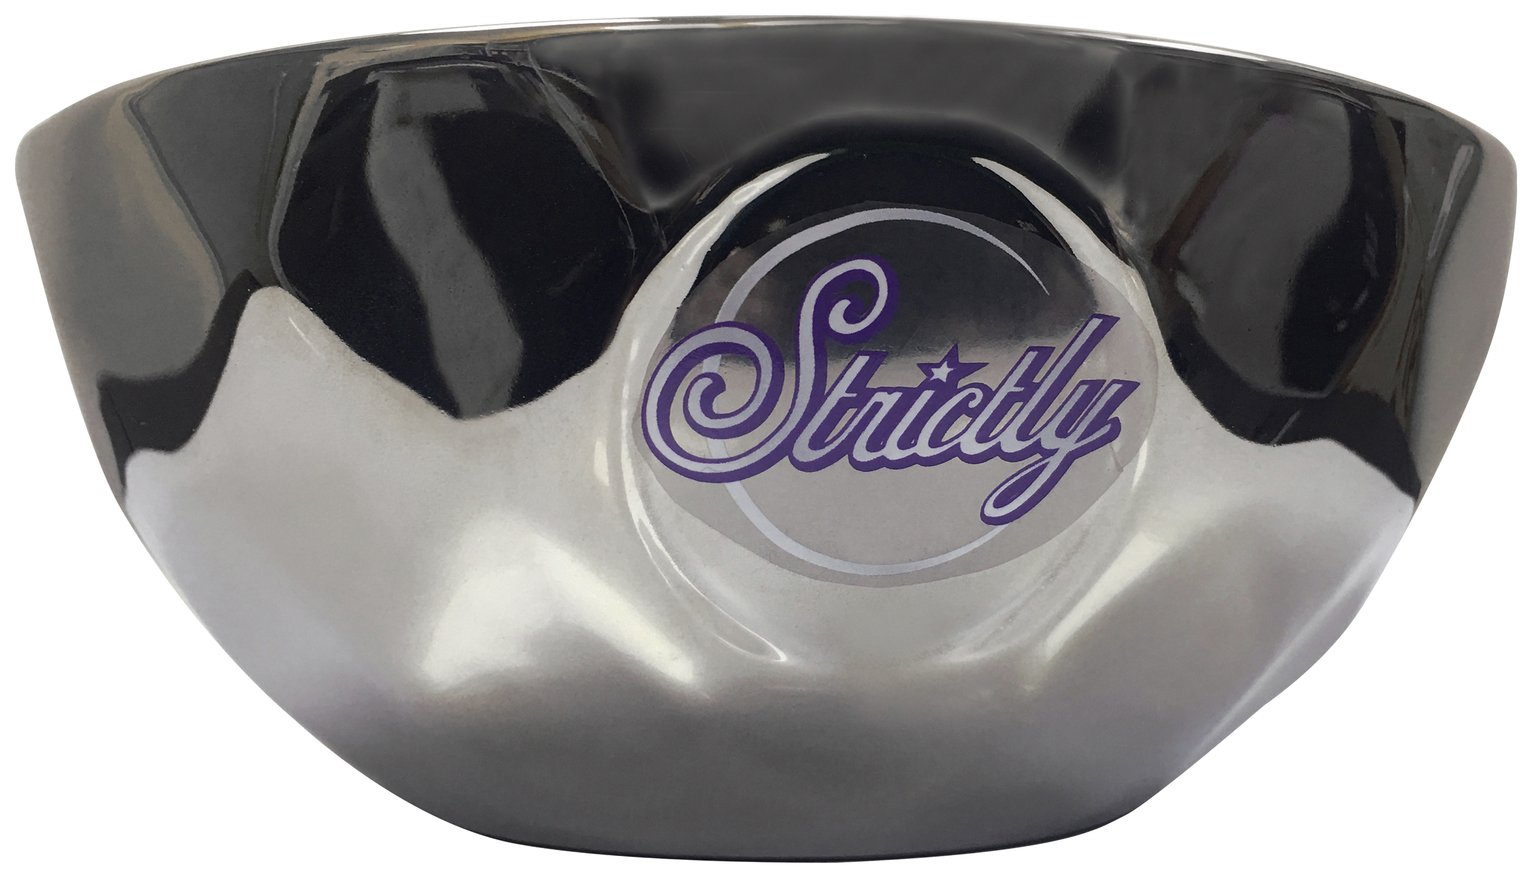 Strictly Come Dancing Popcorn Bowl